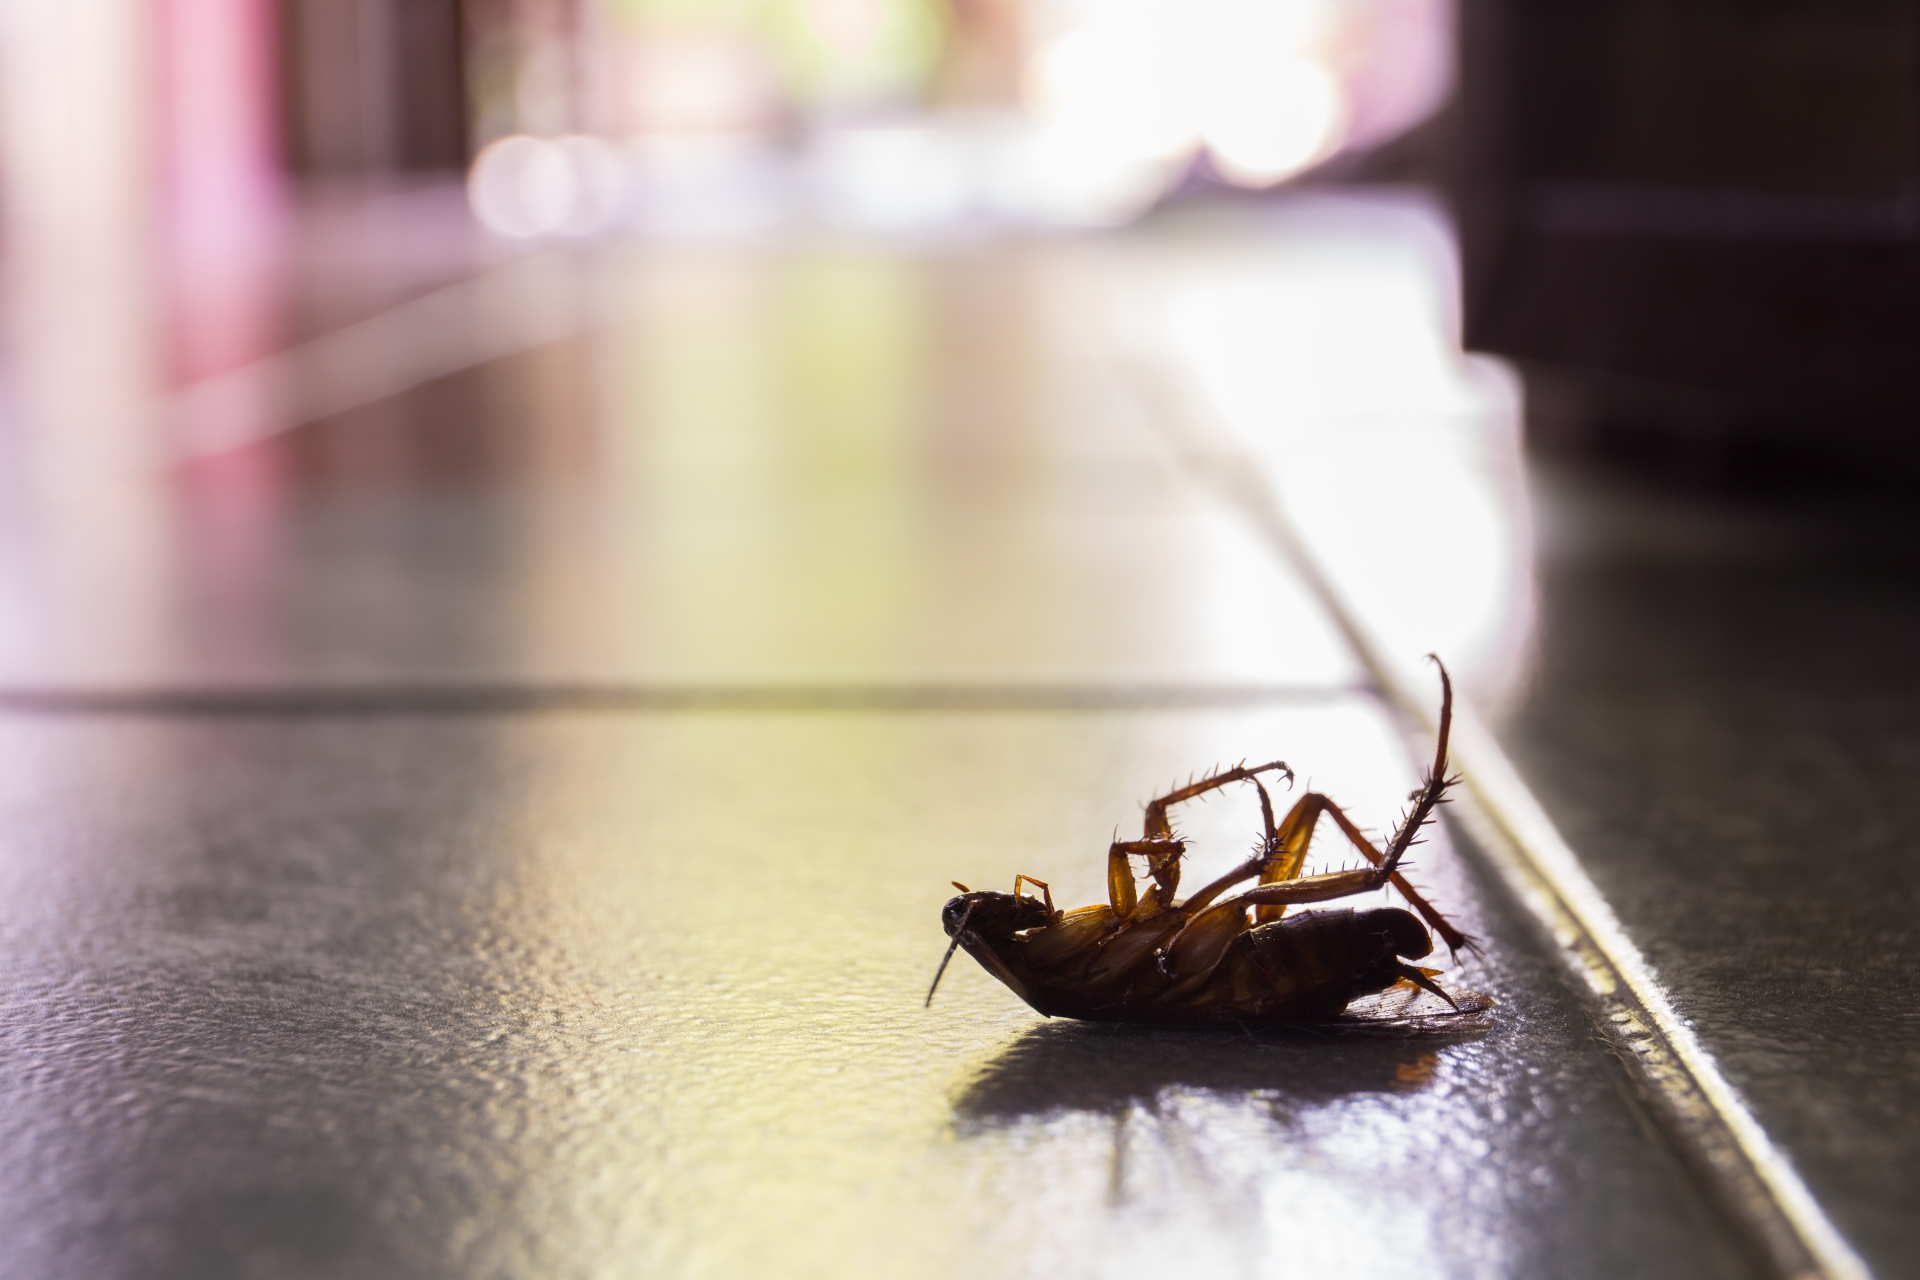 Cockroach Control, Pest Control in East Sheen, SW14. Call Now 020 8166 9746